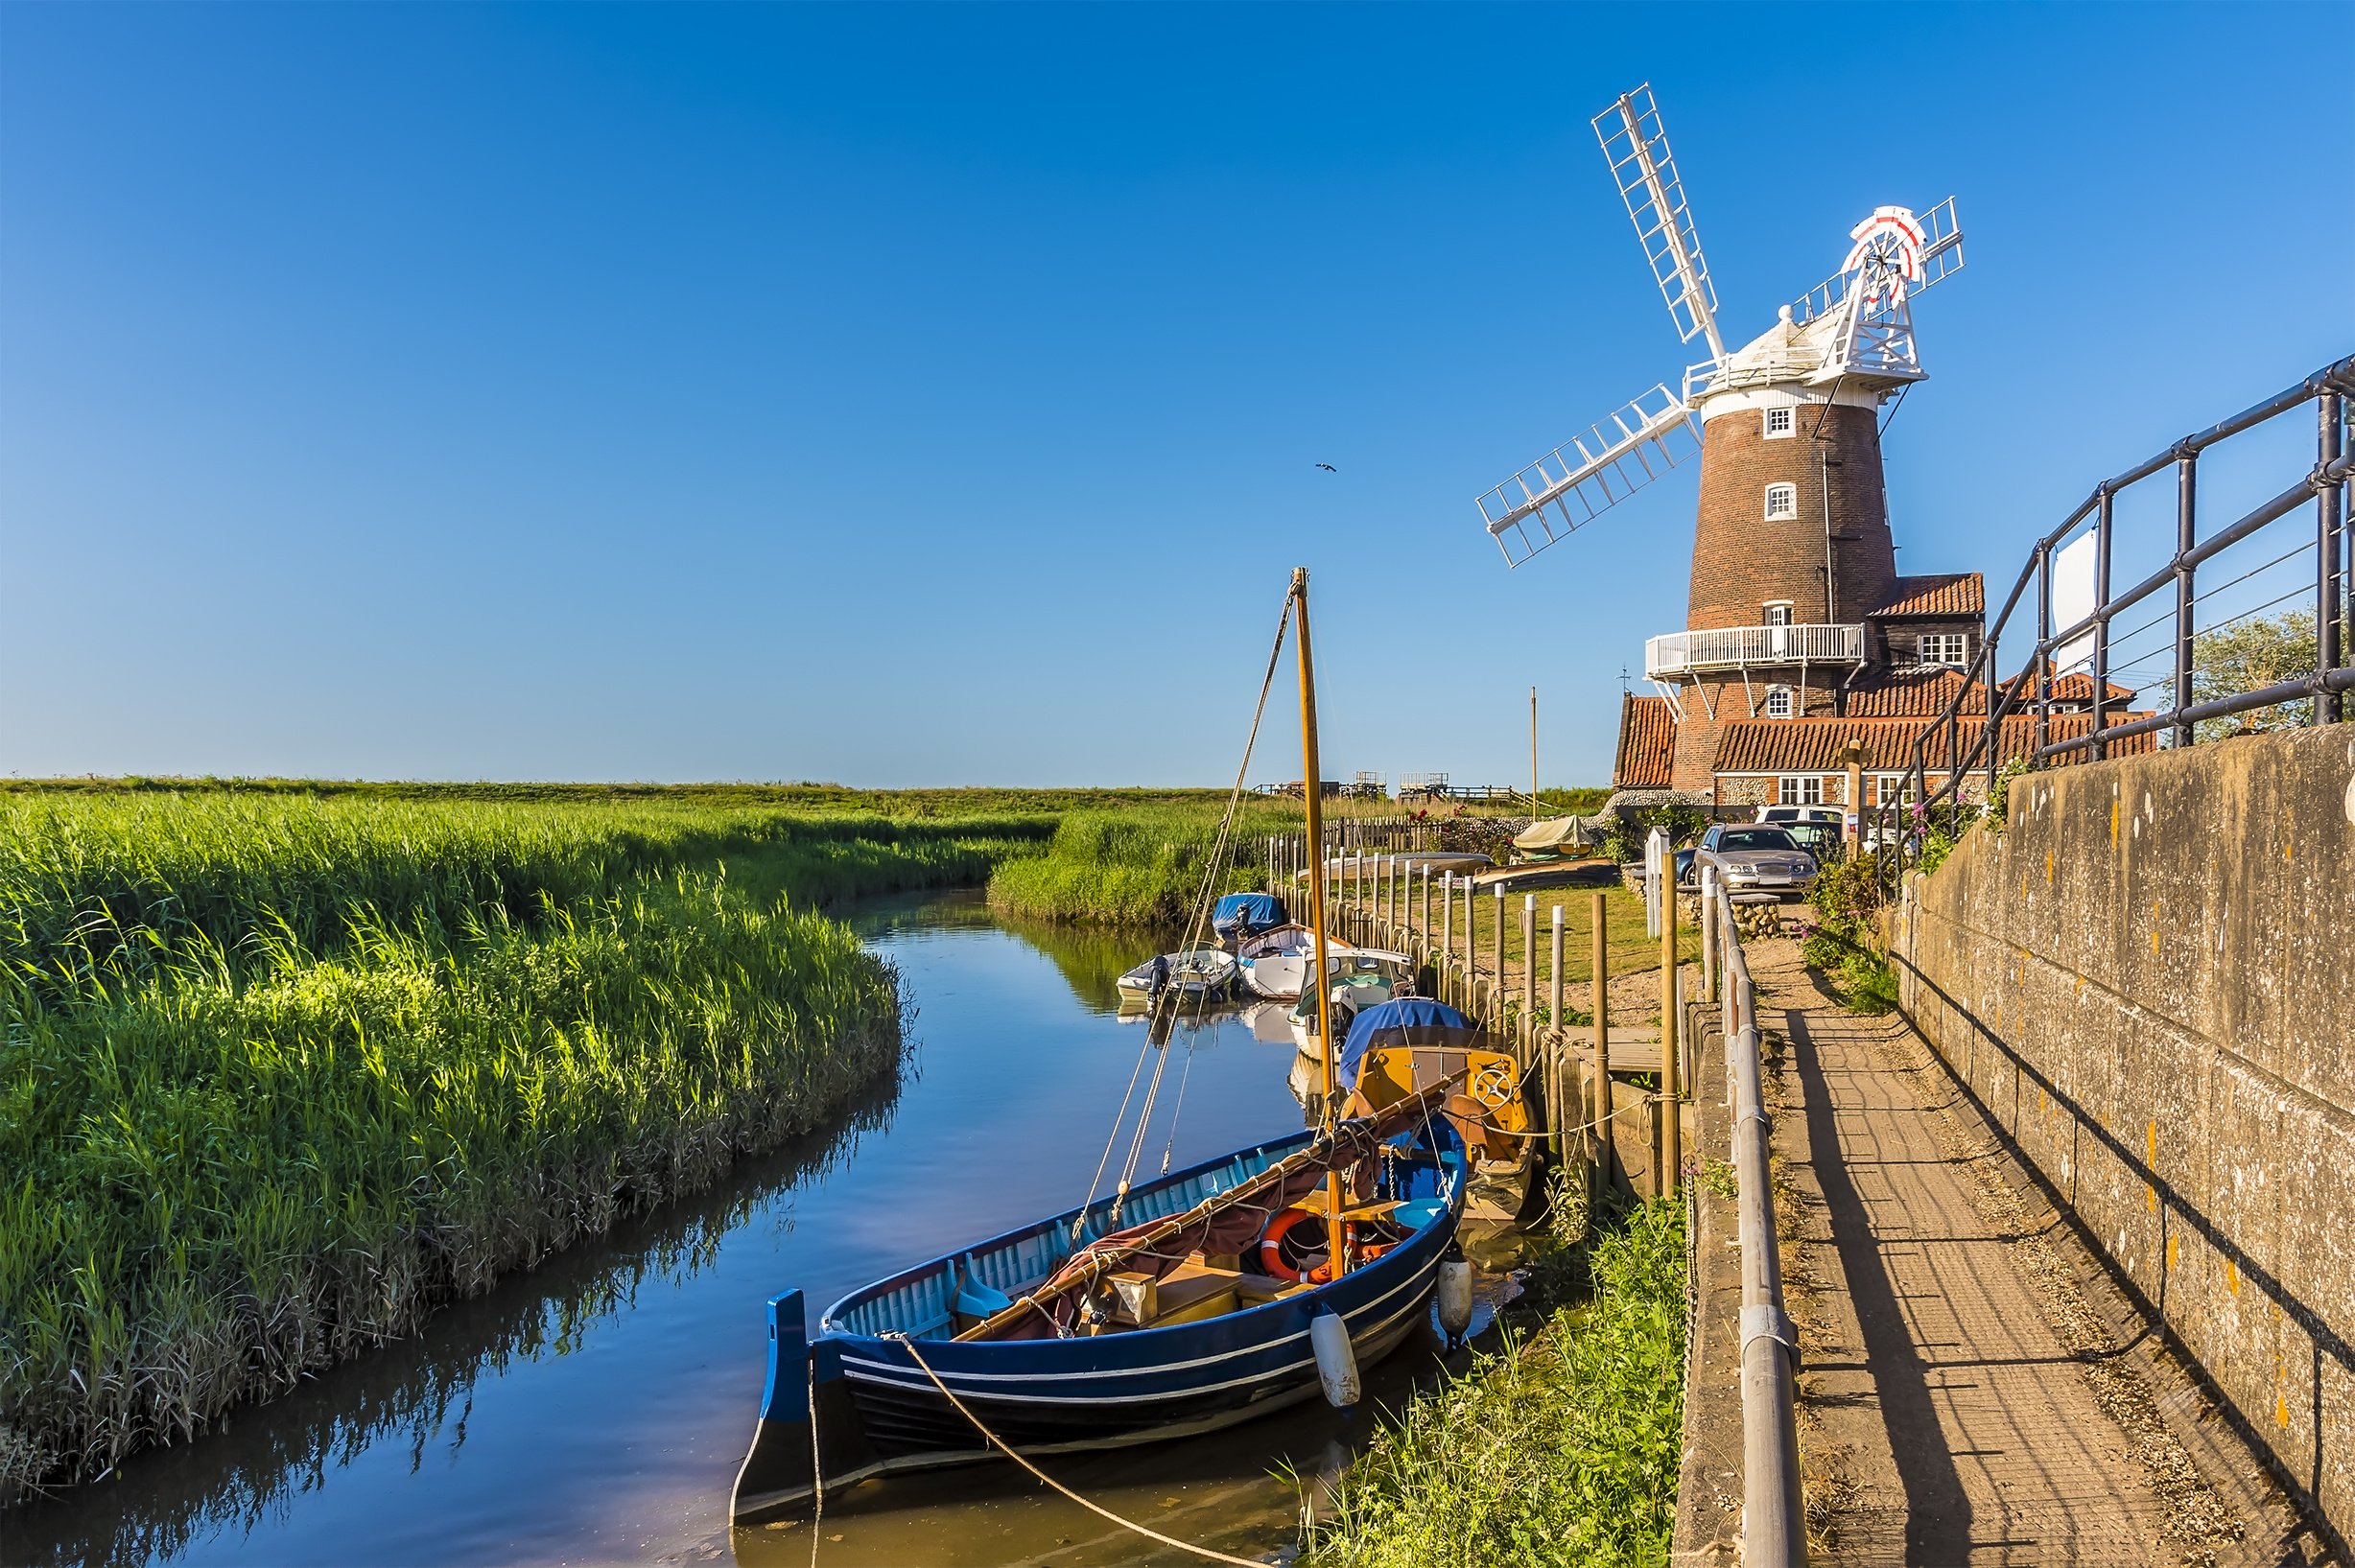 A view along the River Glaven in Cley in Norfolk